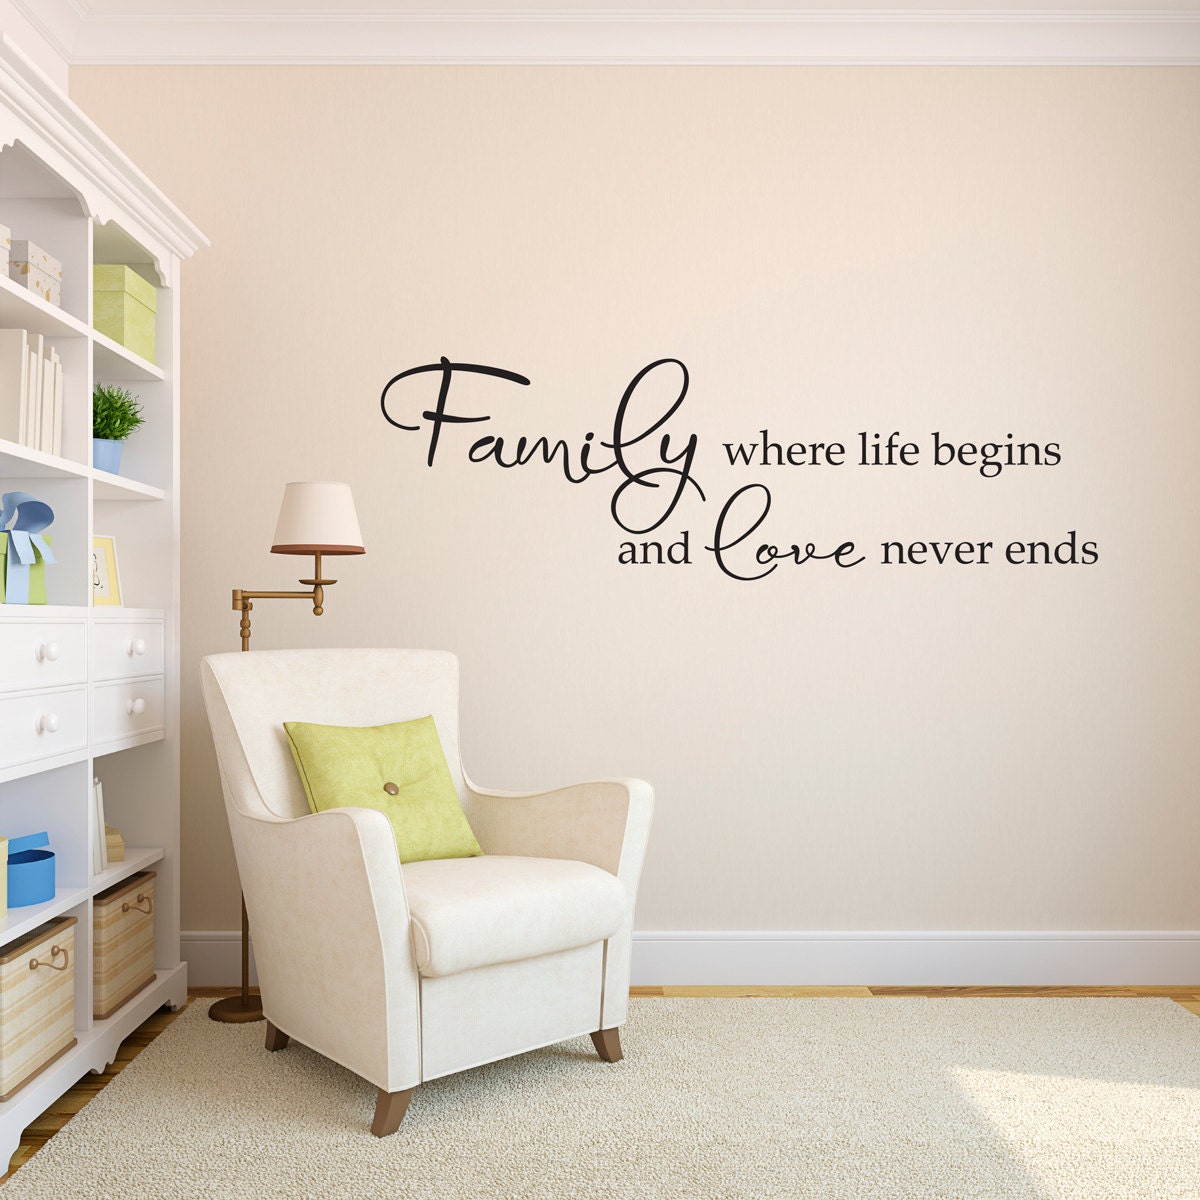 Family Wall Decal - Family where life begins and love never ends decal - Living Room Wall Sticker